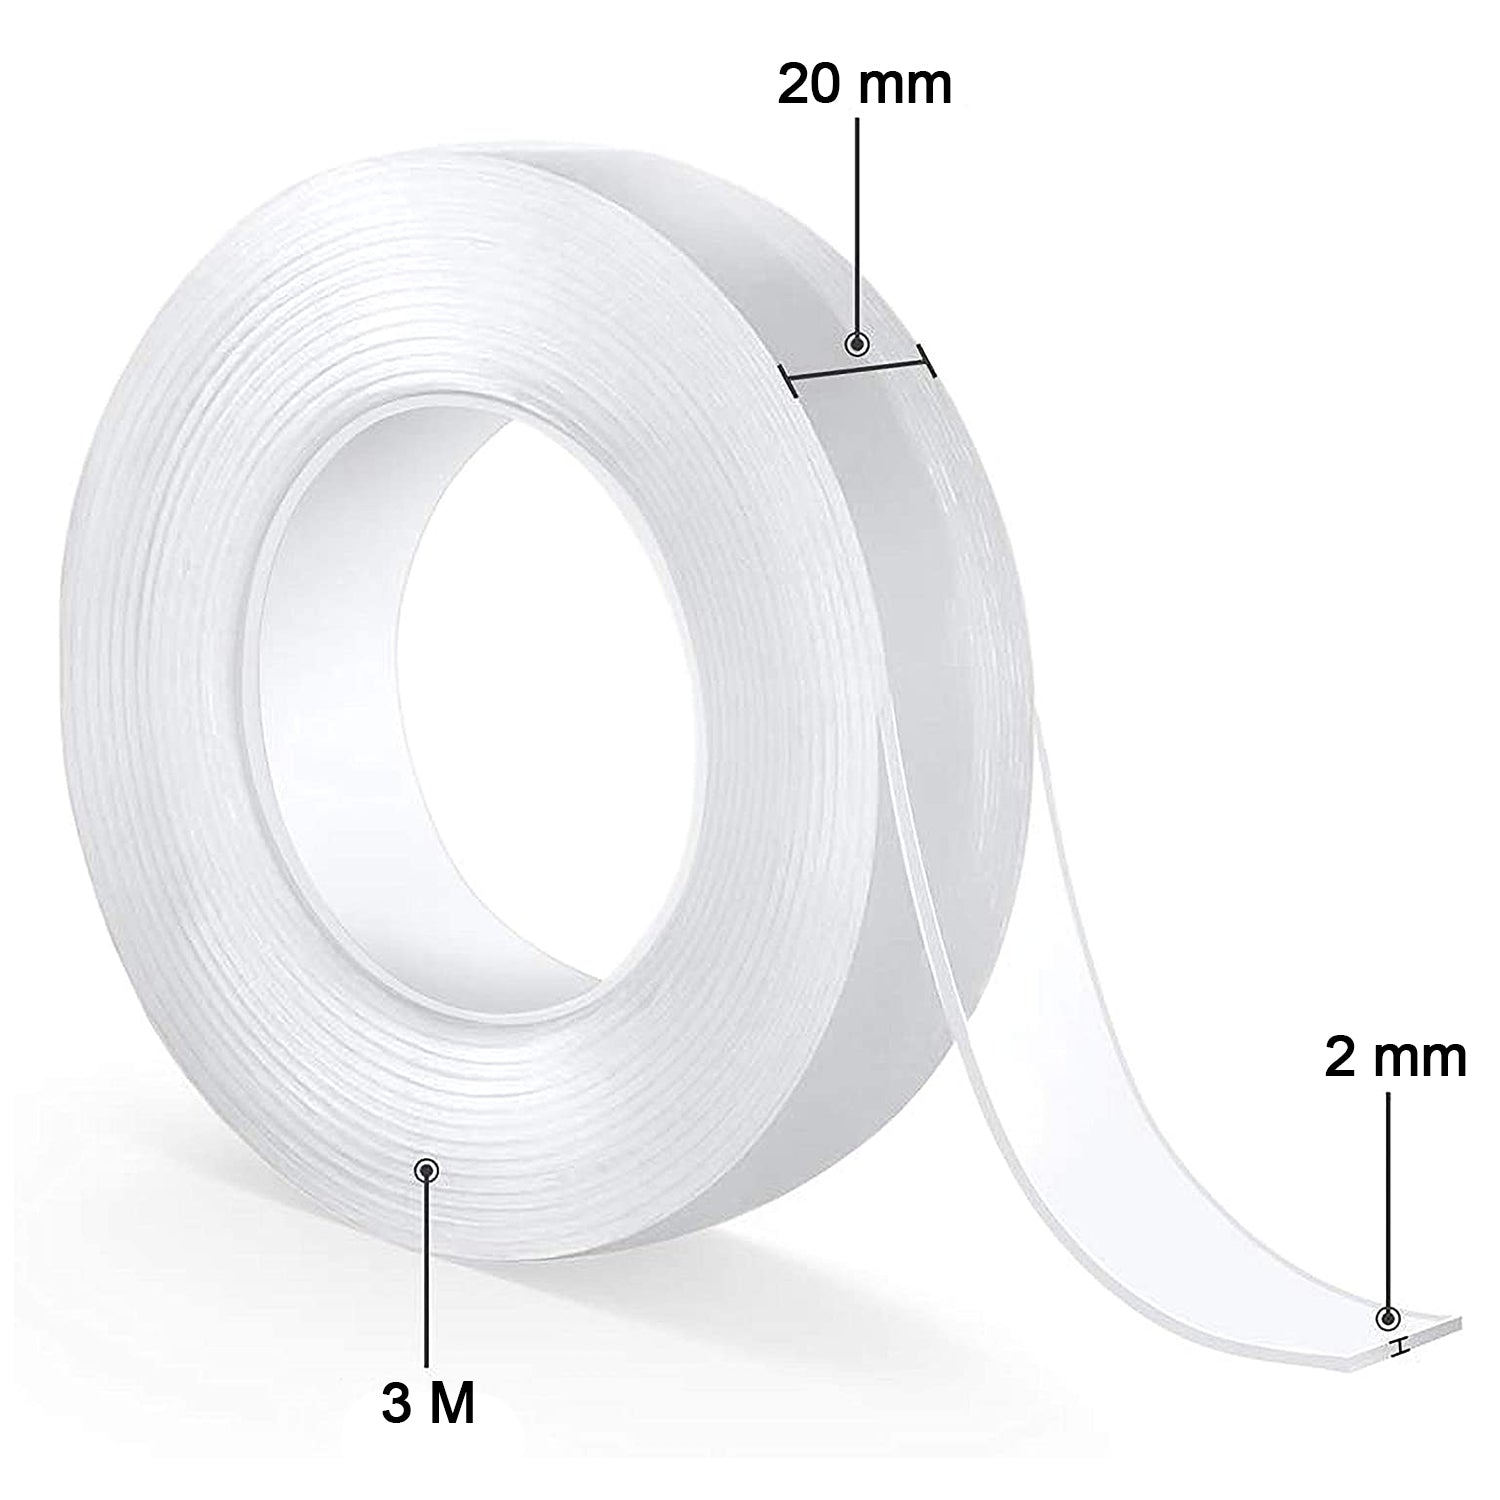 0882A Double Sided Nano Adhesive Tape, 3 meter Size (20mm Width X 2mm Thickness) 